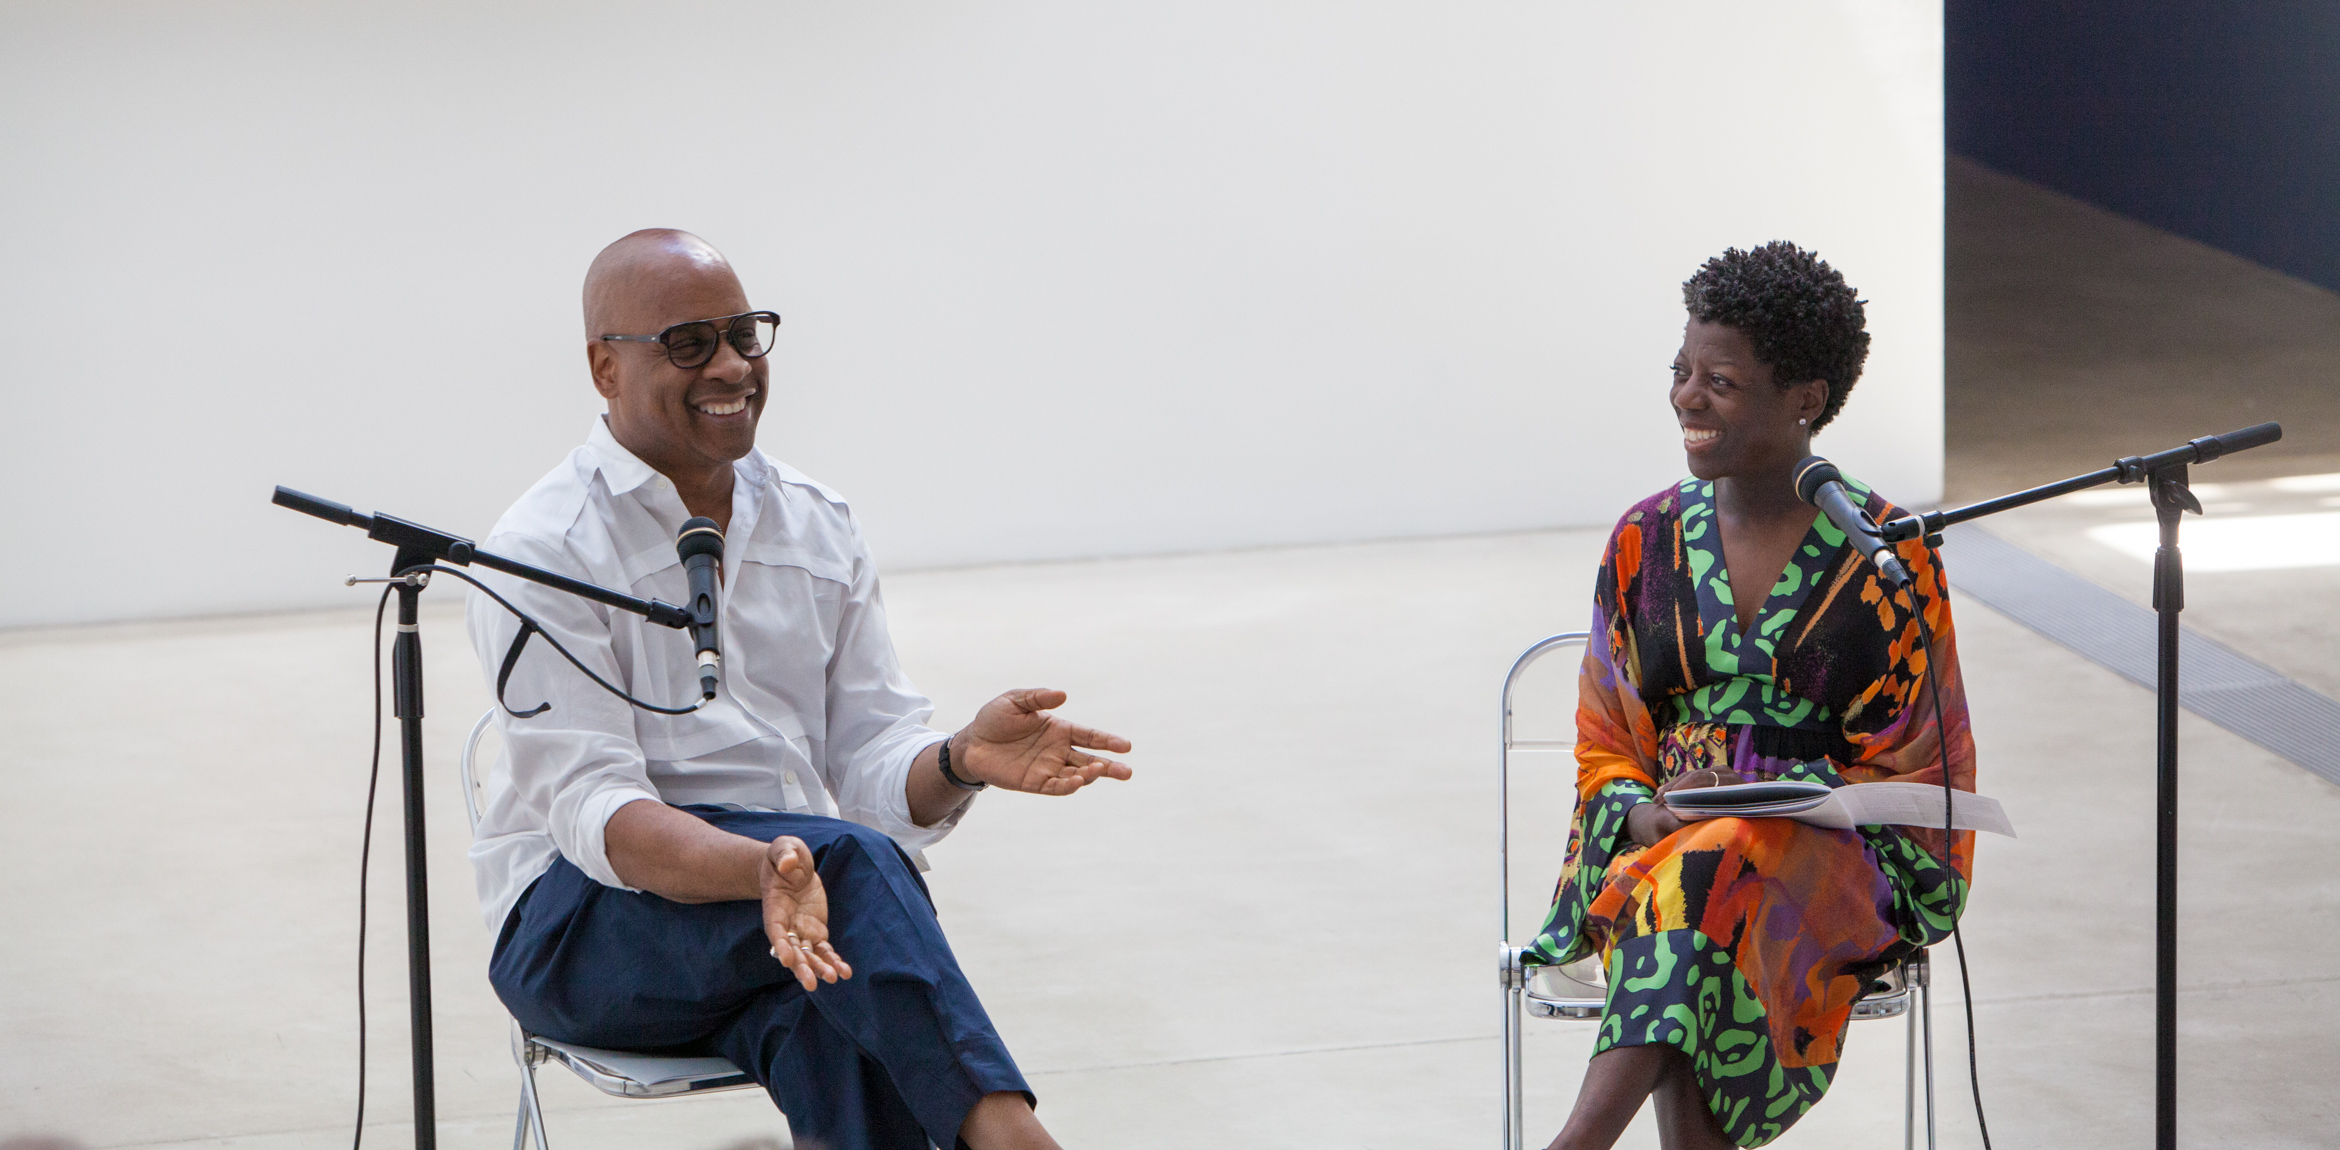 Glenn Ligon and Thelma Golden converse in front of microphones in the Lower Main Gallery.